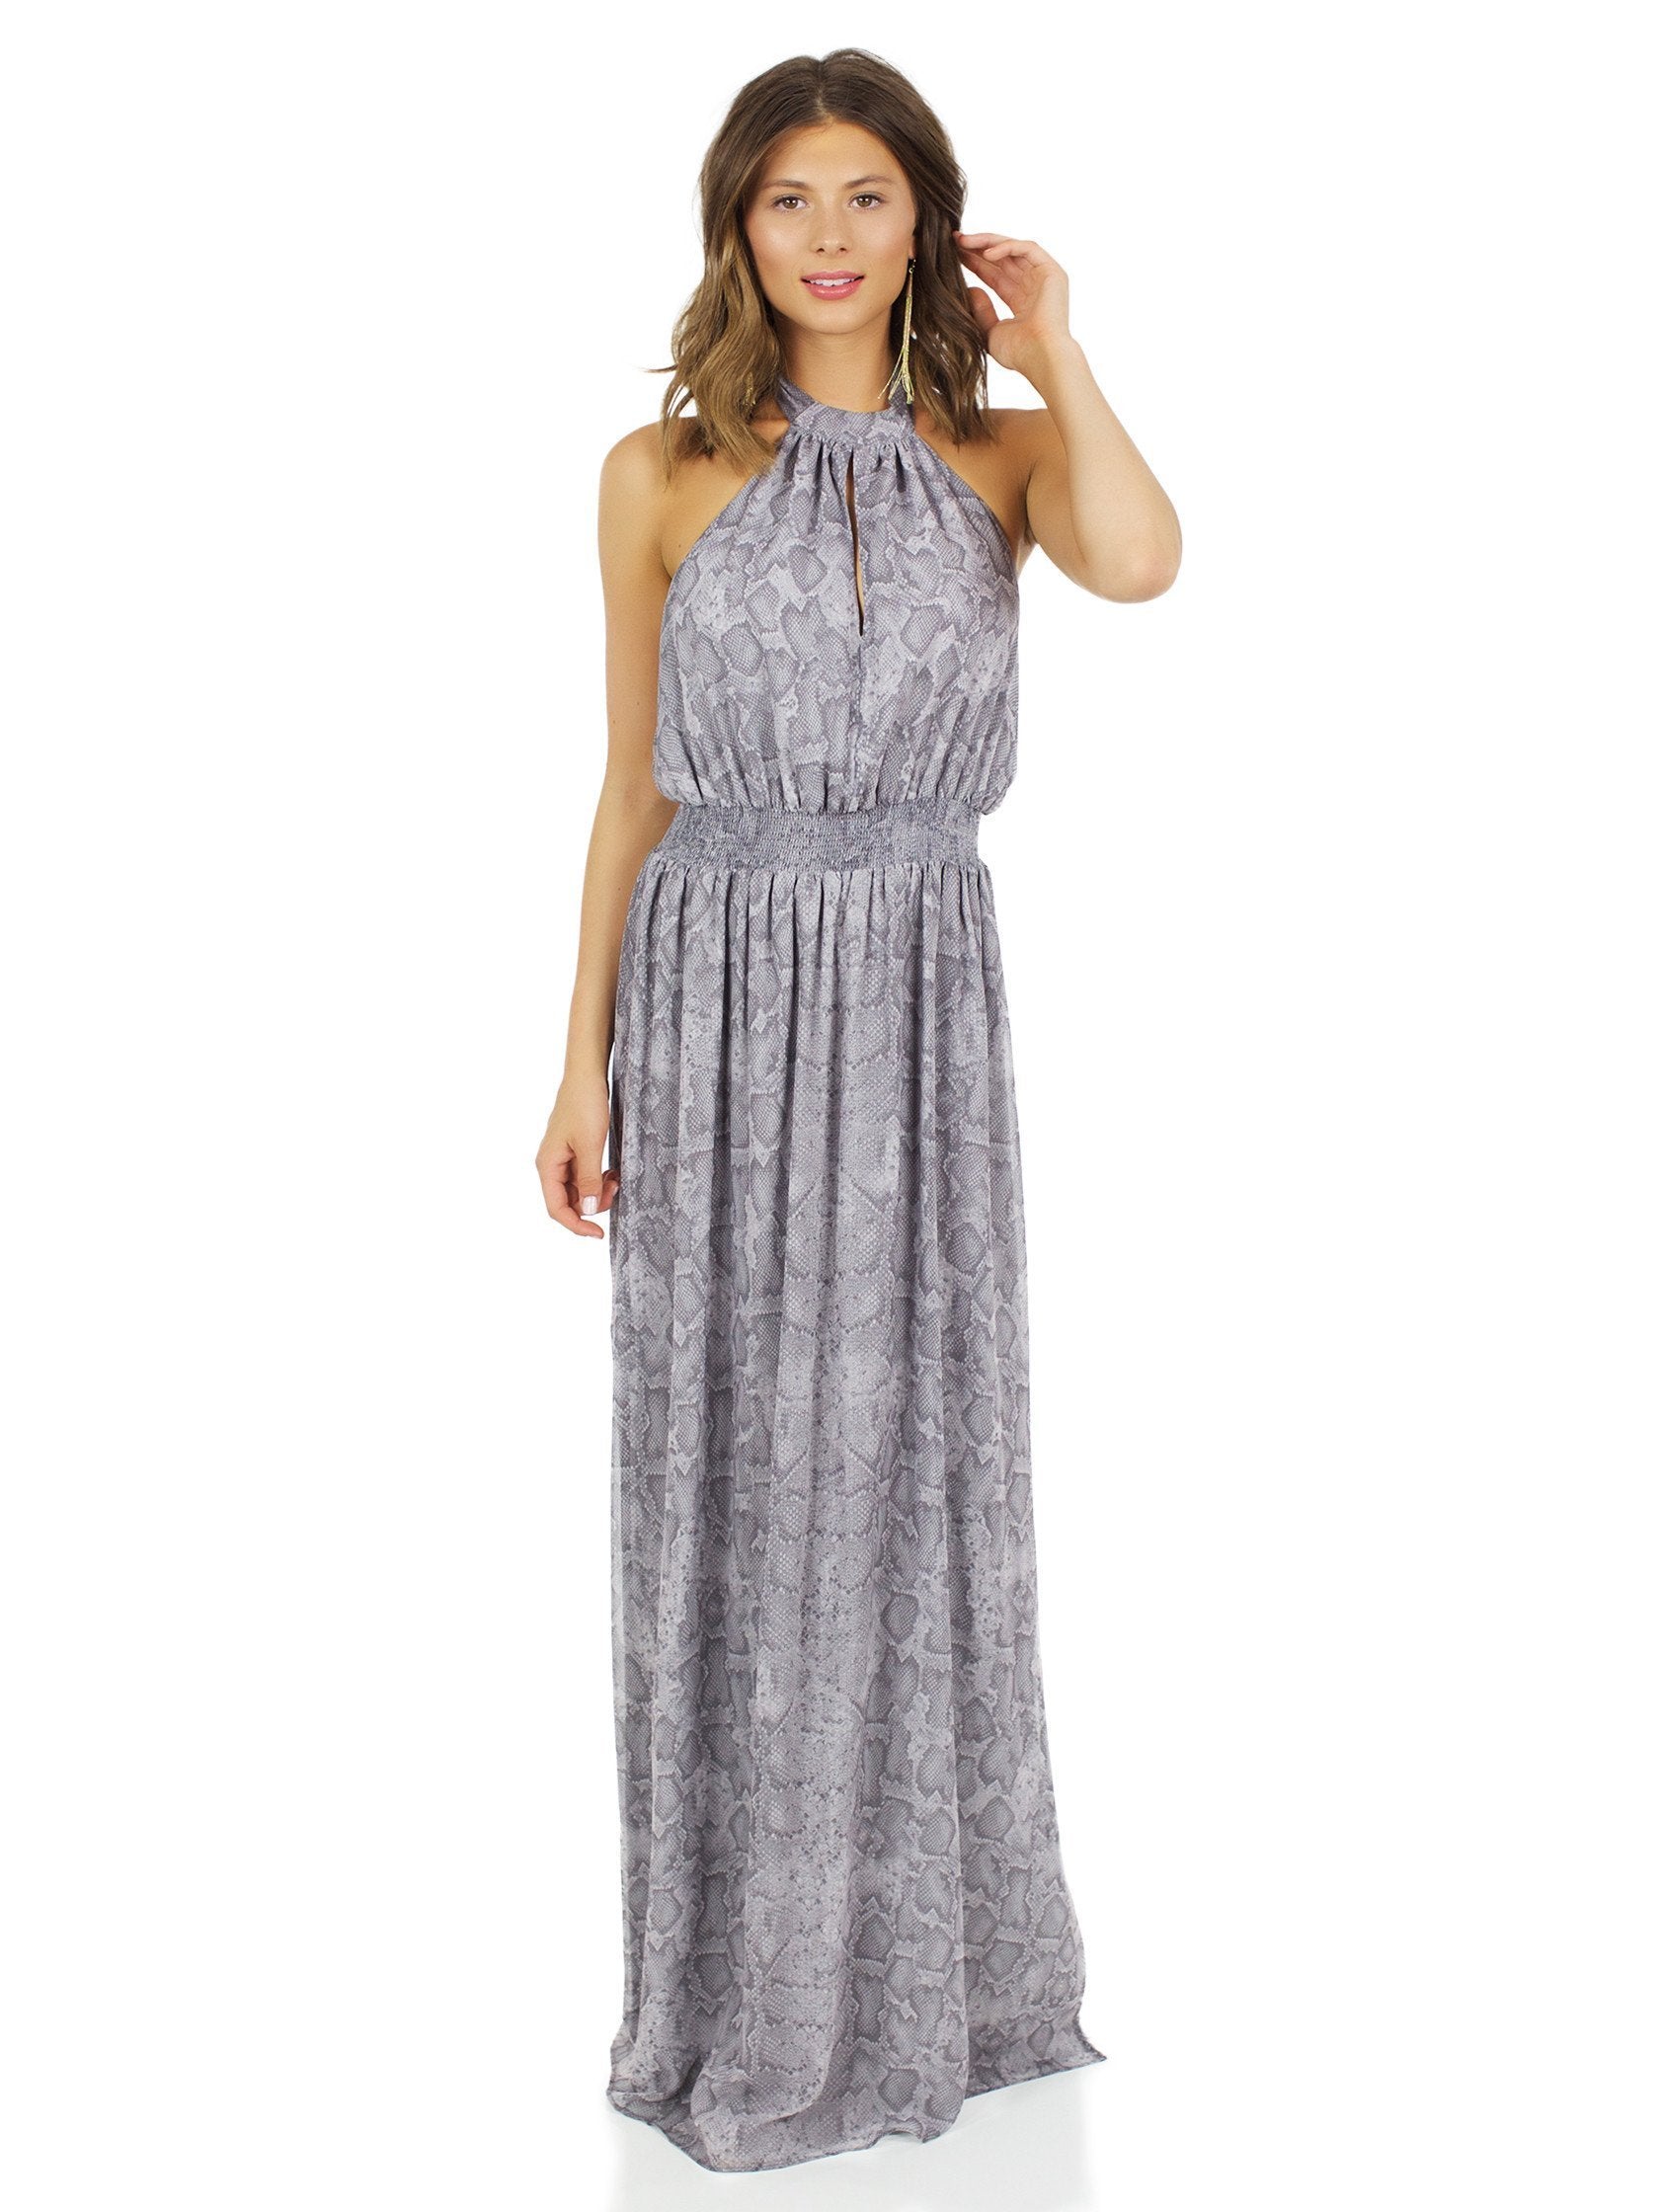 Girl outfit in a dress rental from The Jetset Diaries called Medusa Maxi Dress